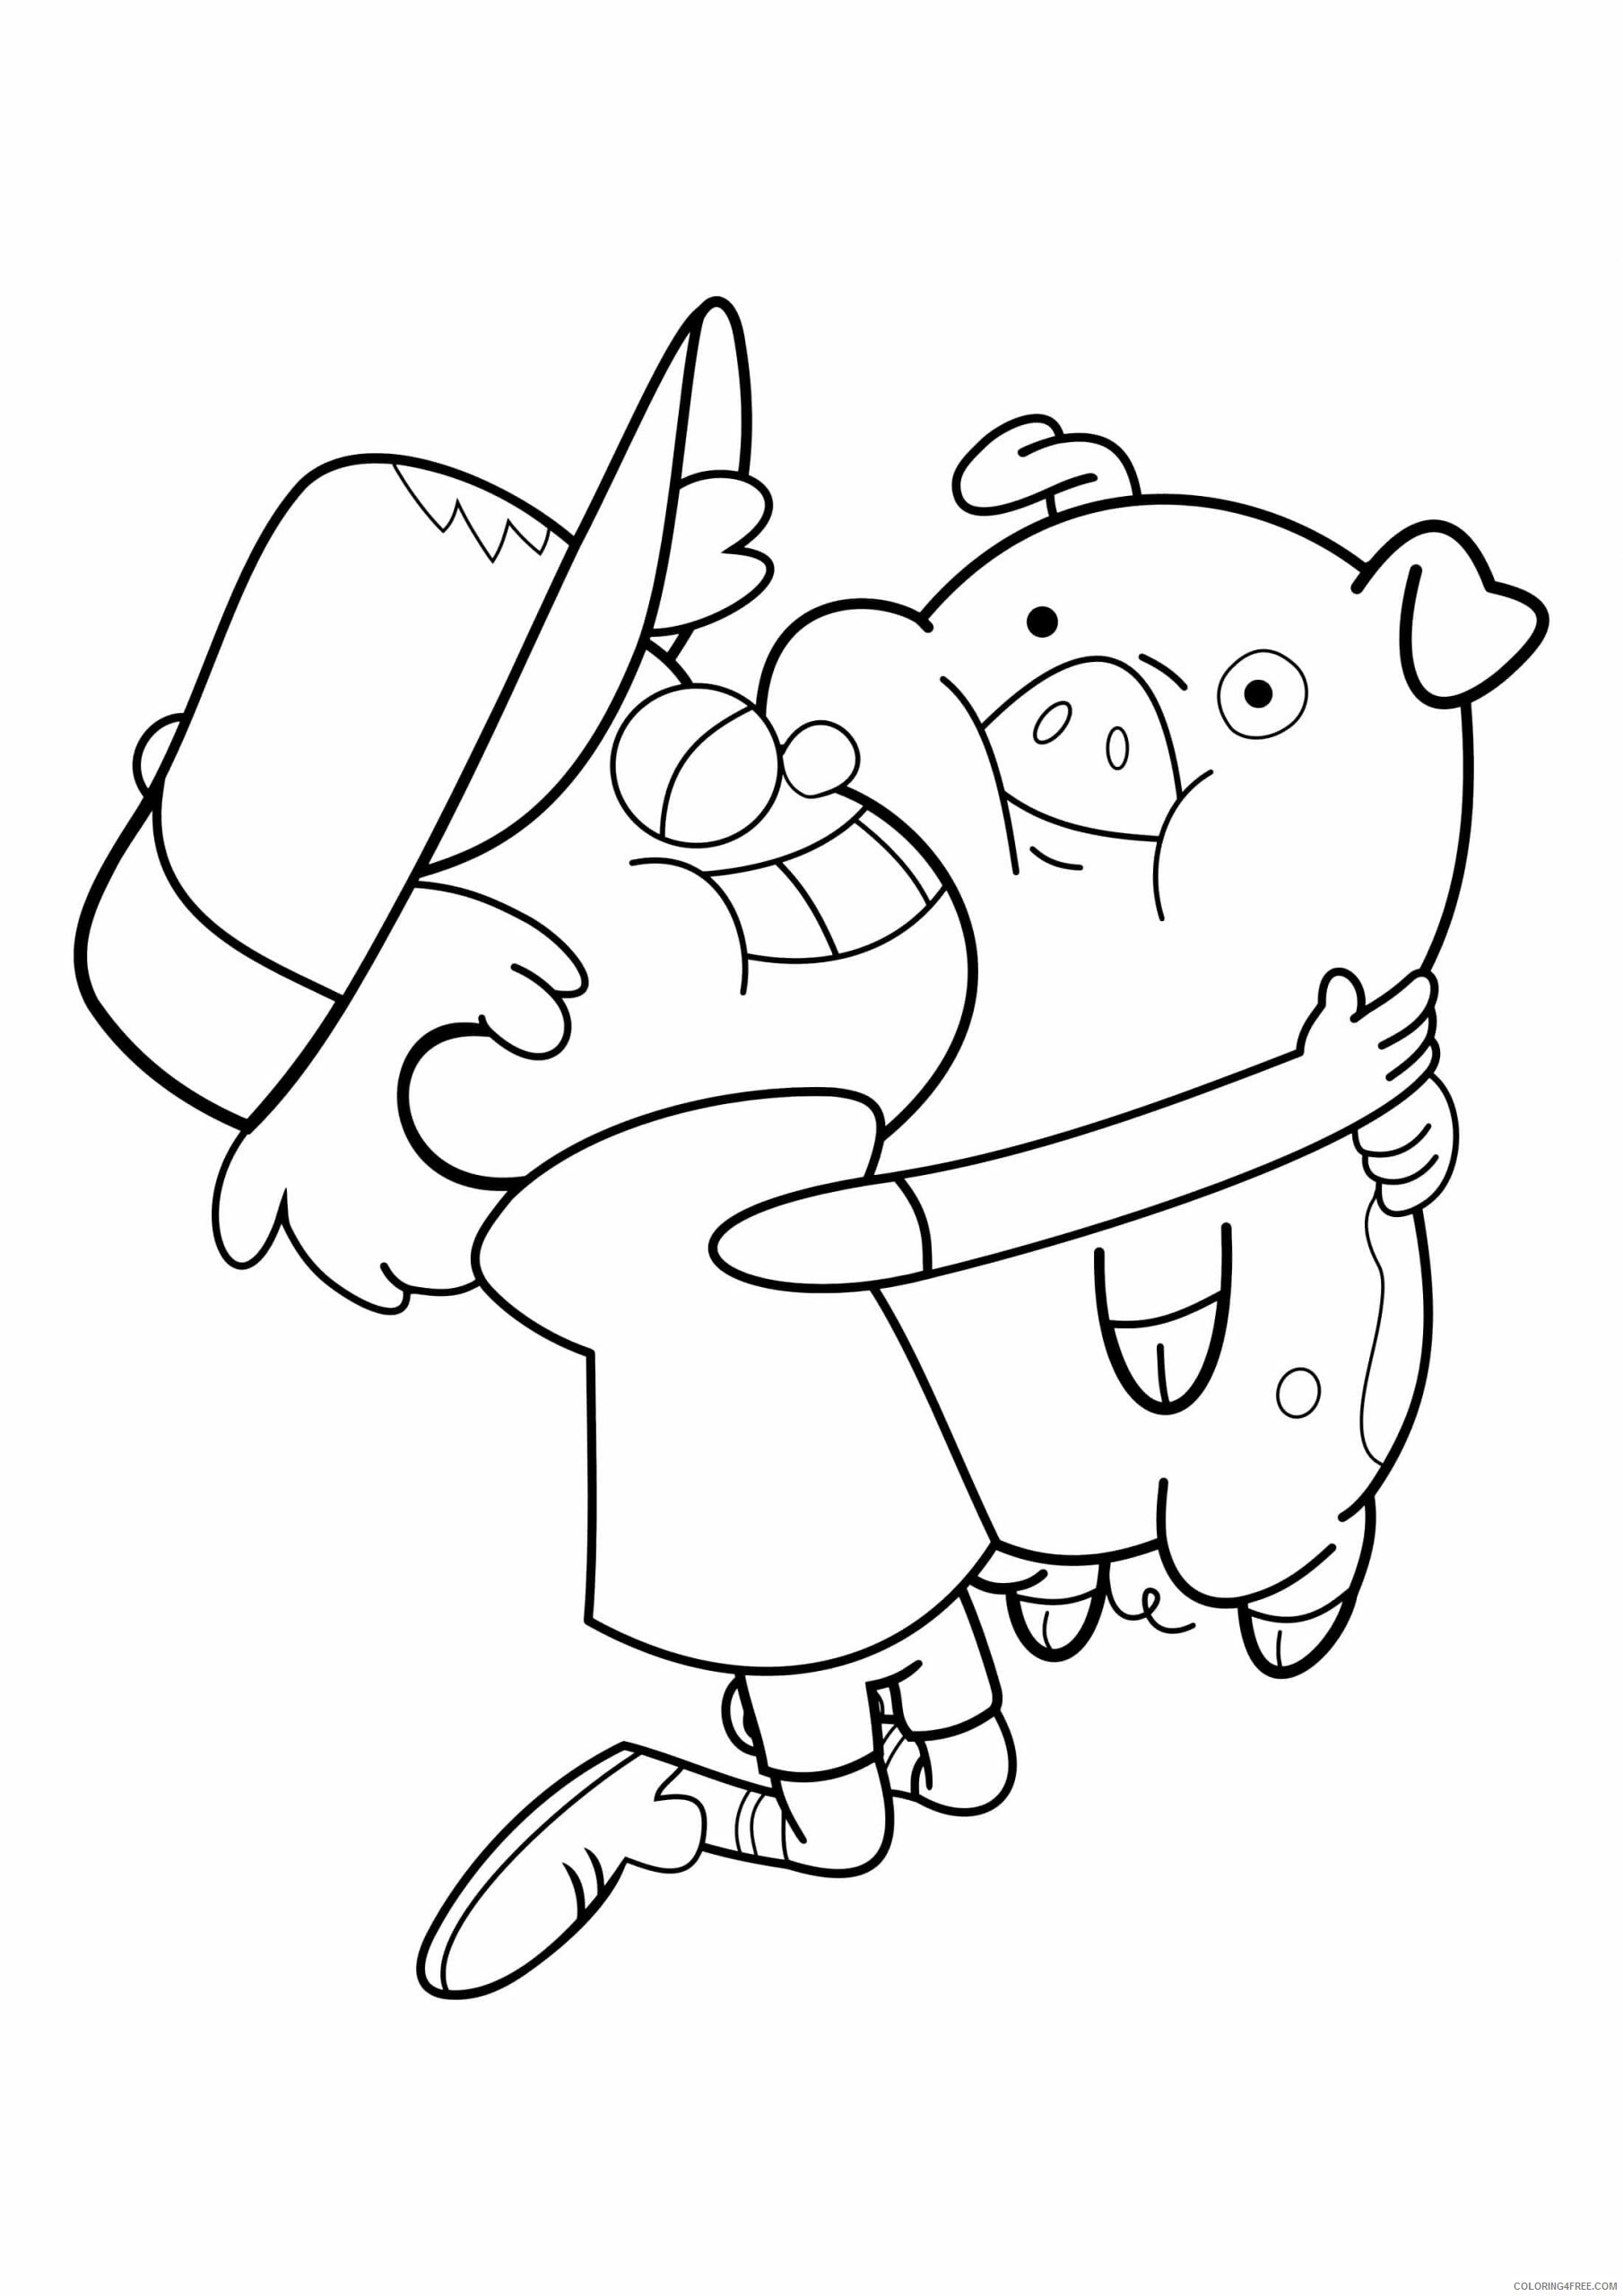 Gravity Falls Coloring Pages TV Film Dipper and Waddles Printable 2020 03323 Coloring4free